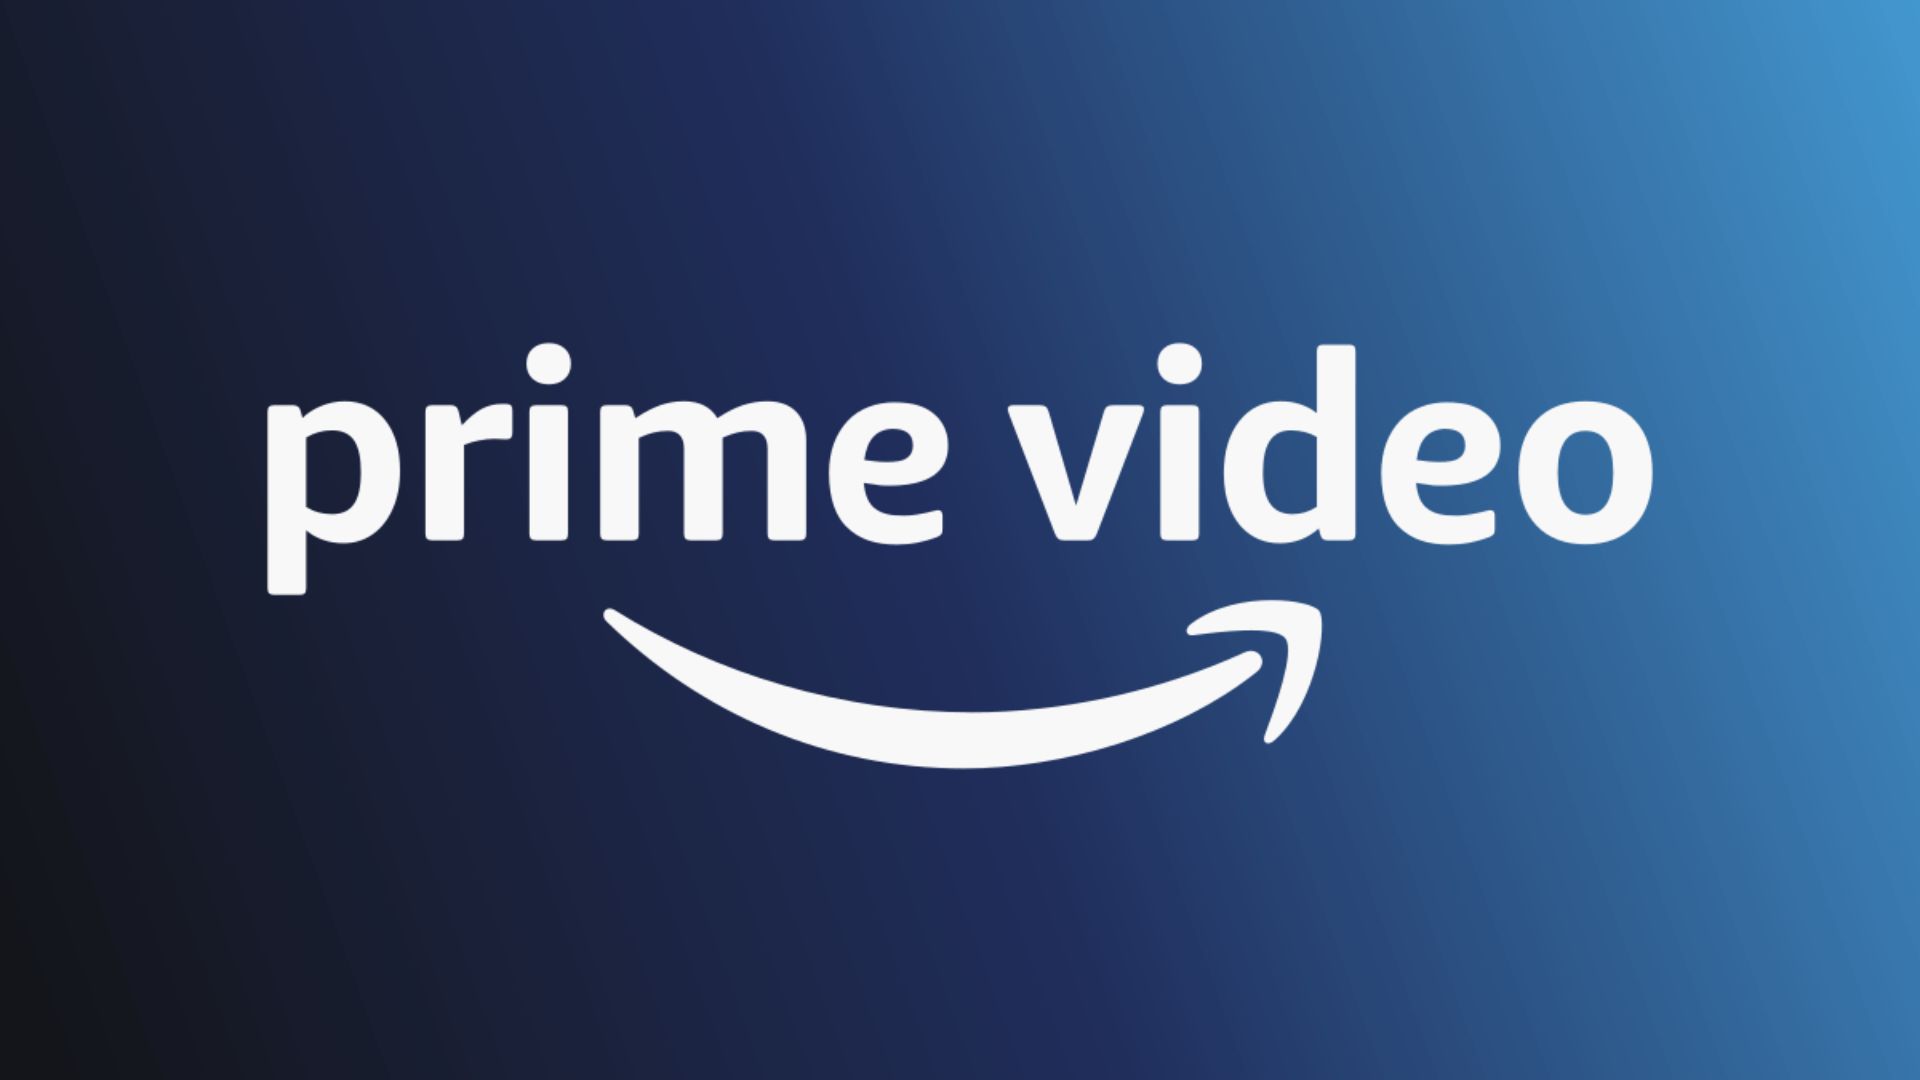 Prime Video: Unwanted Guest